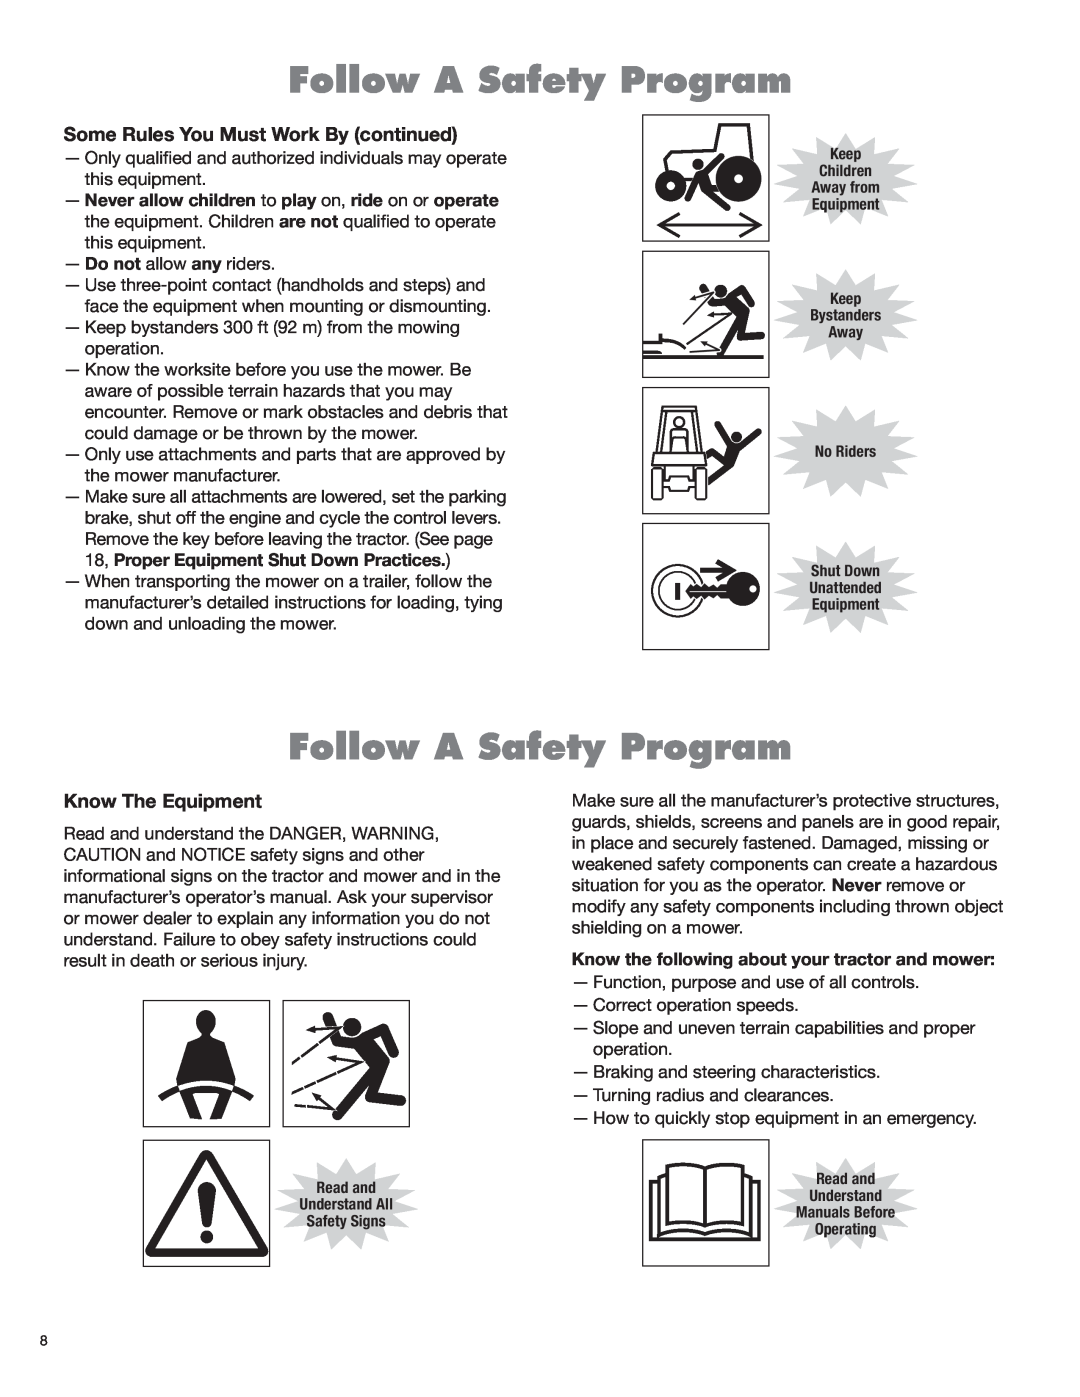 Servis-Rhino 2160 manual Follow A Safety Program, Some Rules You Must Work By continued, Know The Equipment 